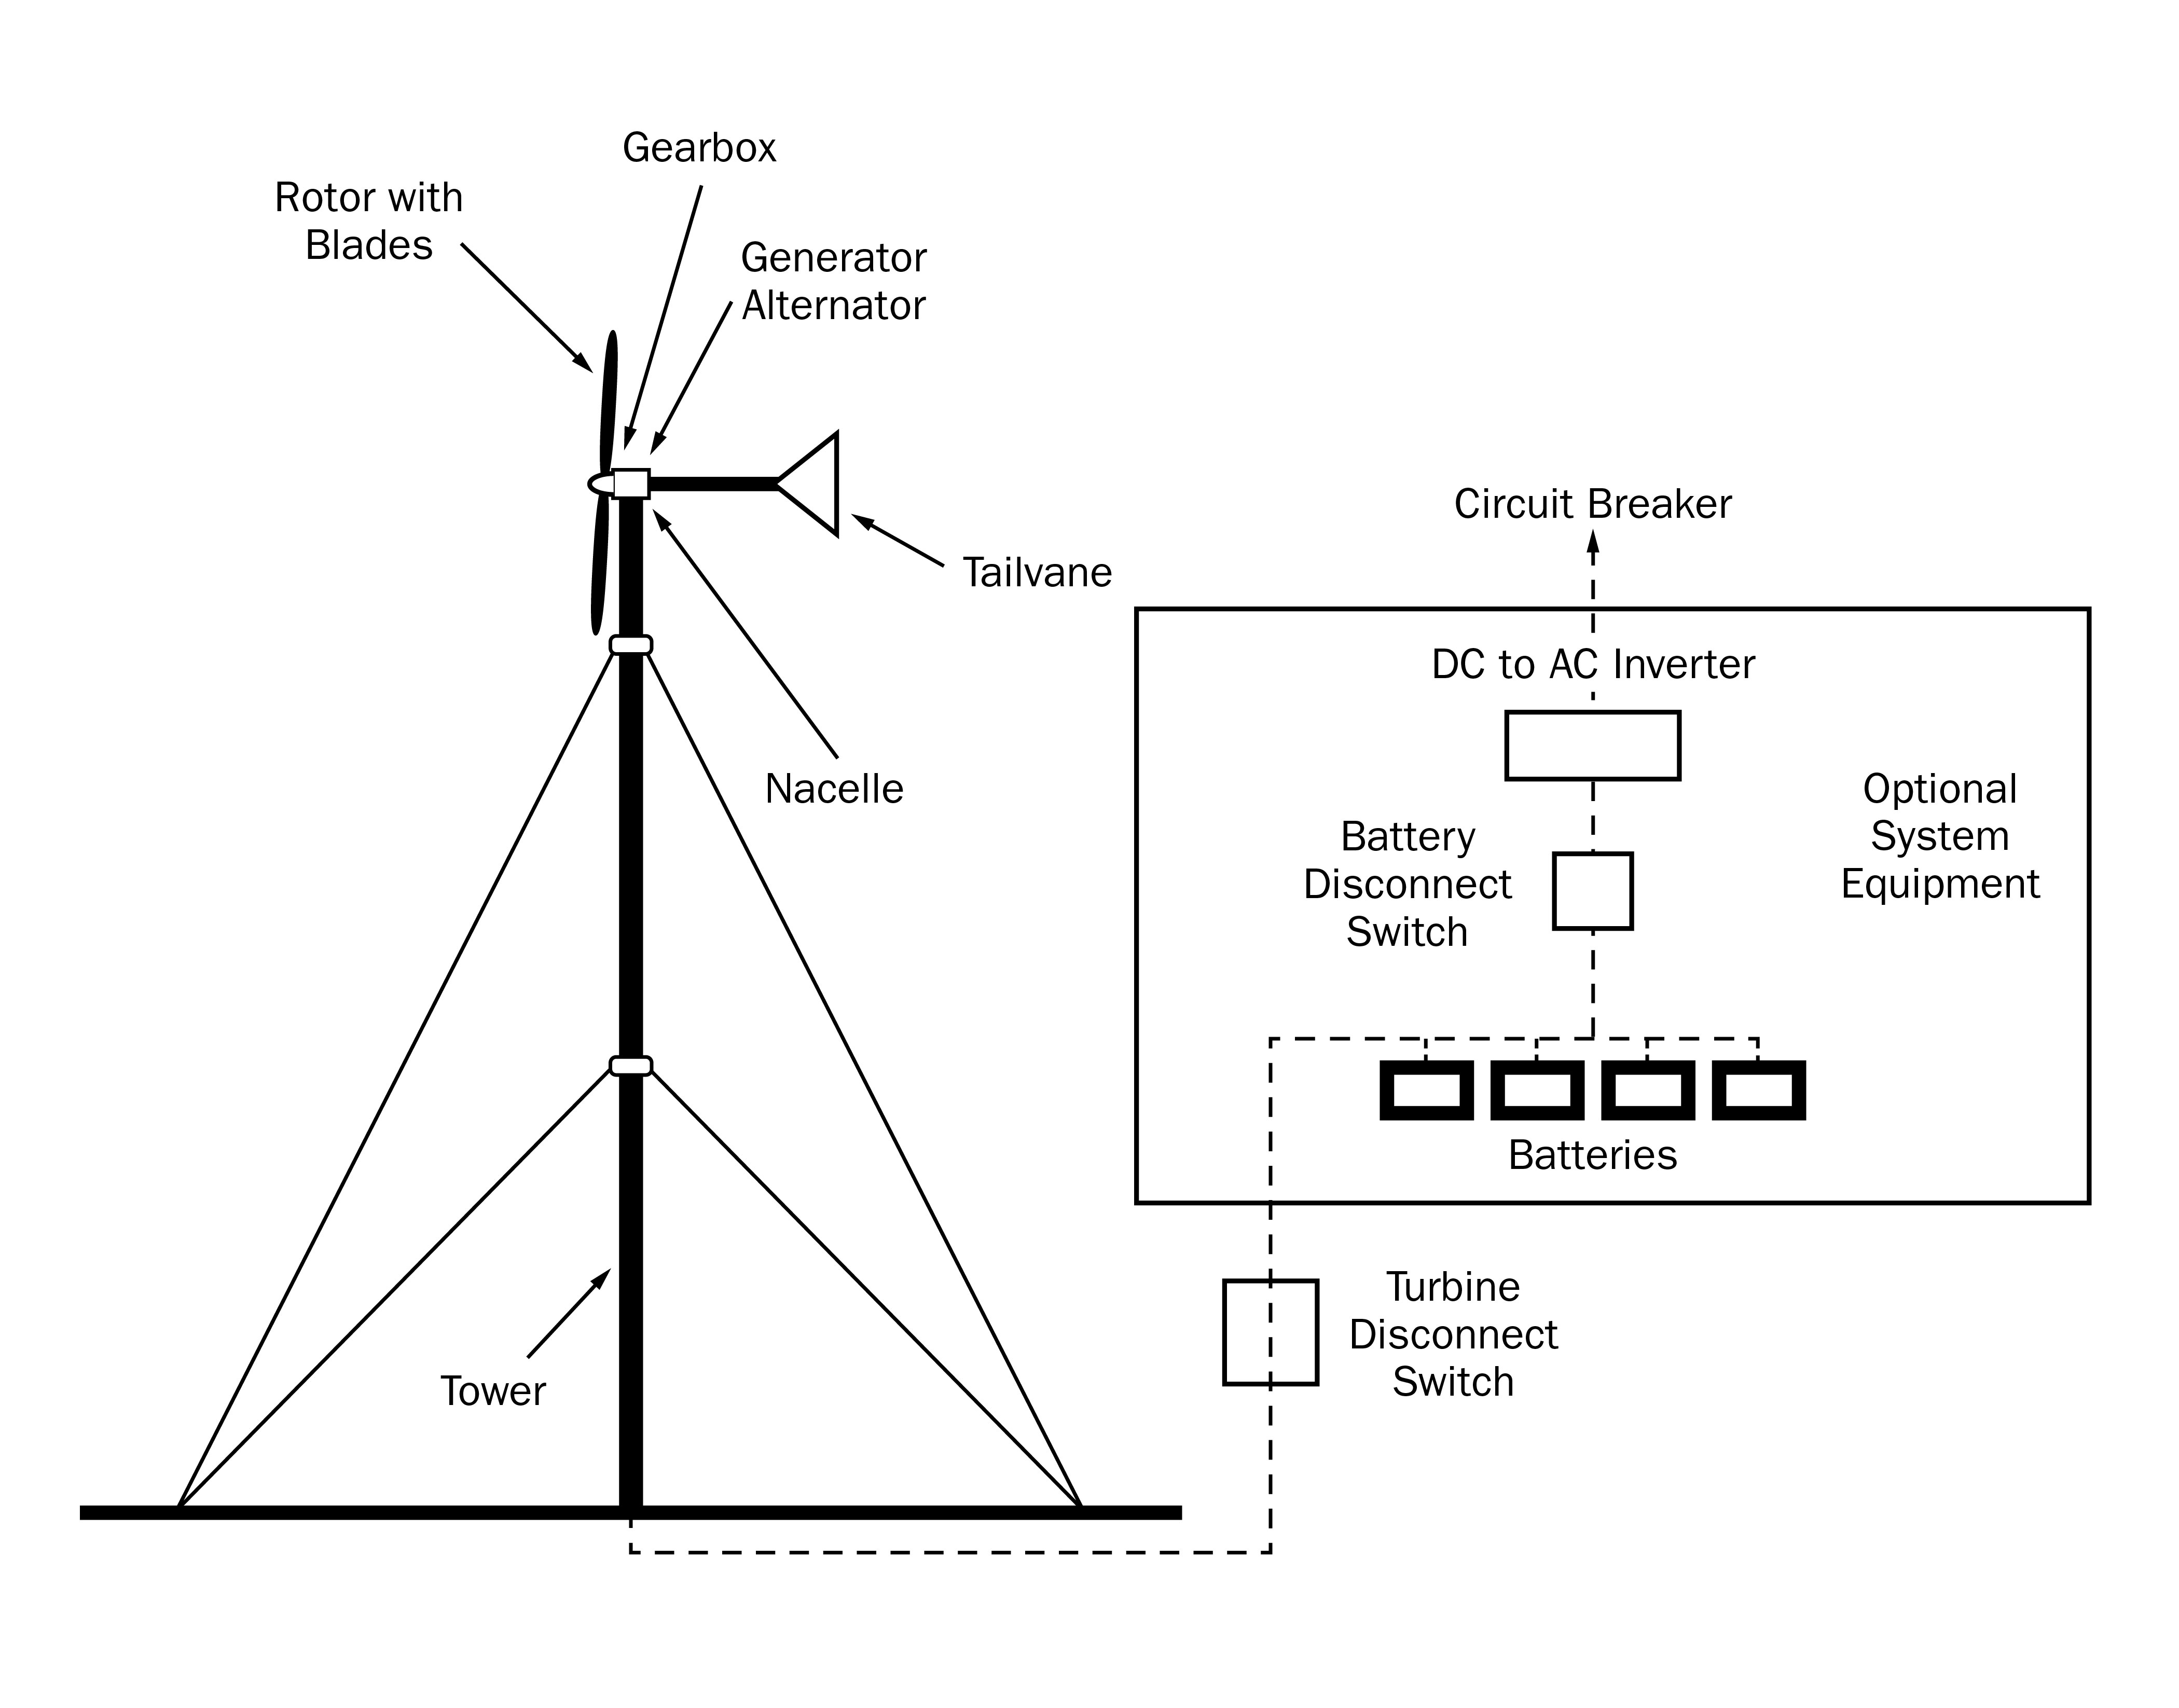 Components of a stand-alone wind energy system, including the electronic portion